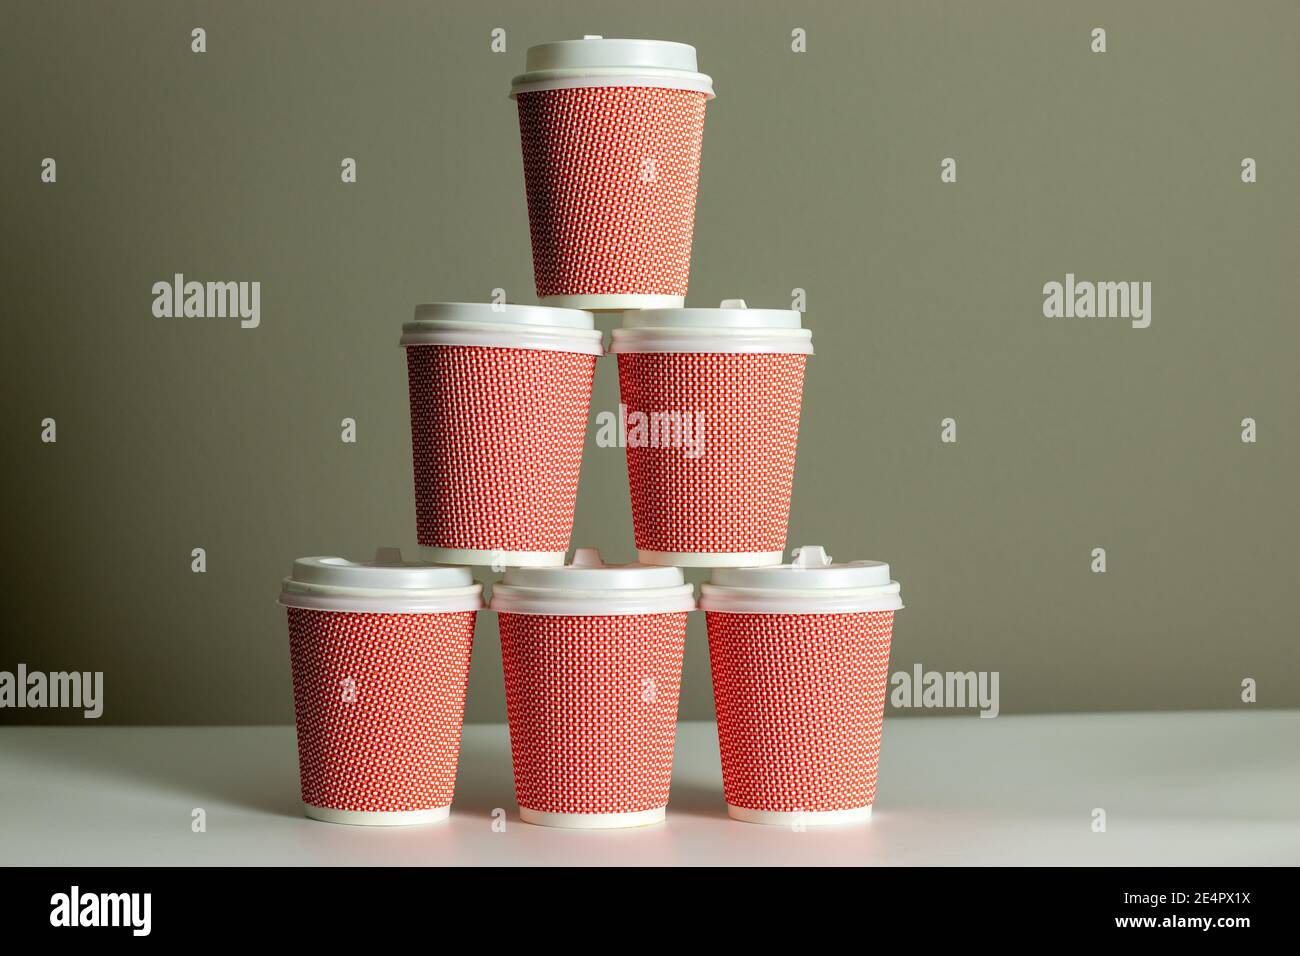 Pyramid of coffee cups with gray background. Cup of coffee. Takeaway or takeout business Stock Photo